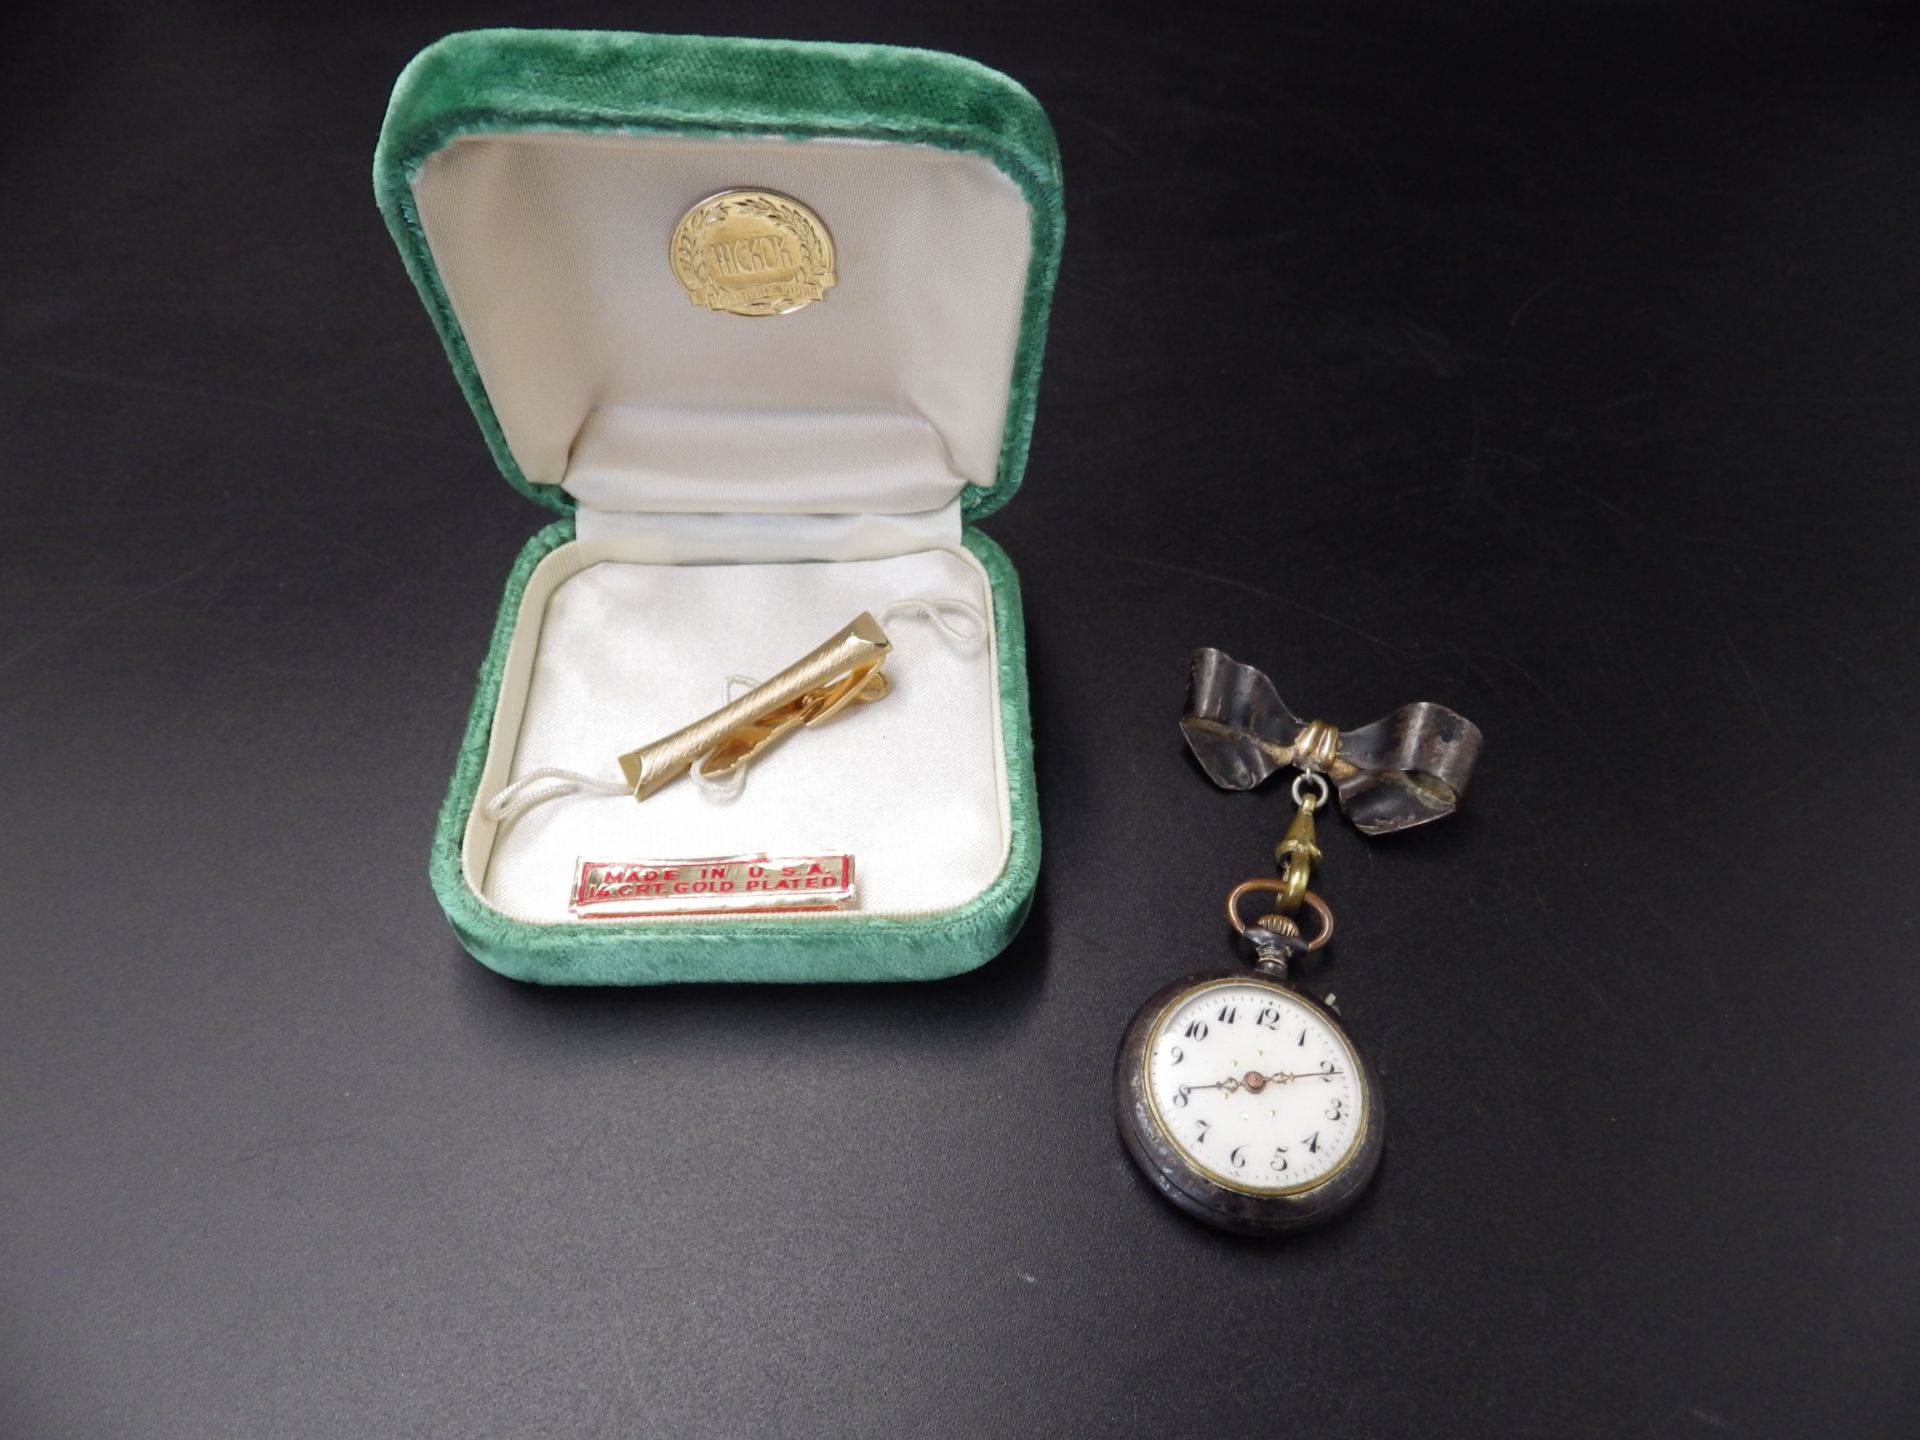 An early 20th C ladies lapel watch in a 'gun metal' case, with a bow pin fastening, and a 14ct